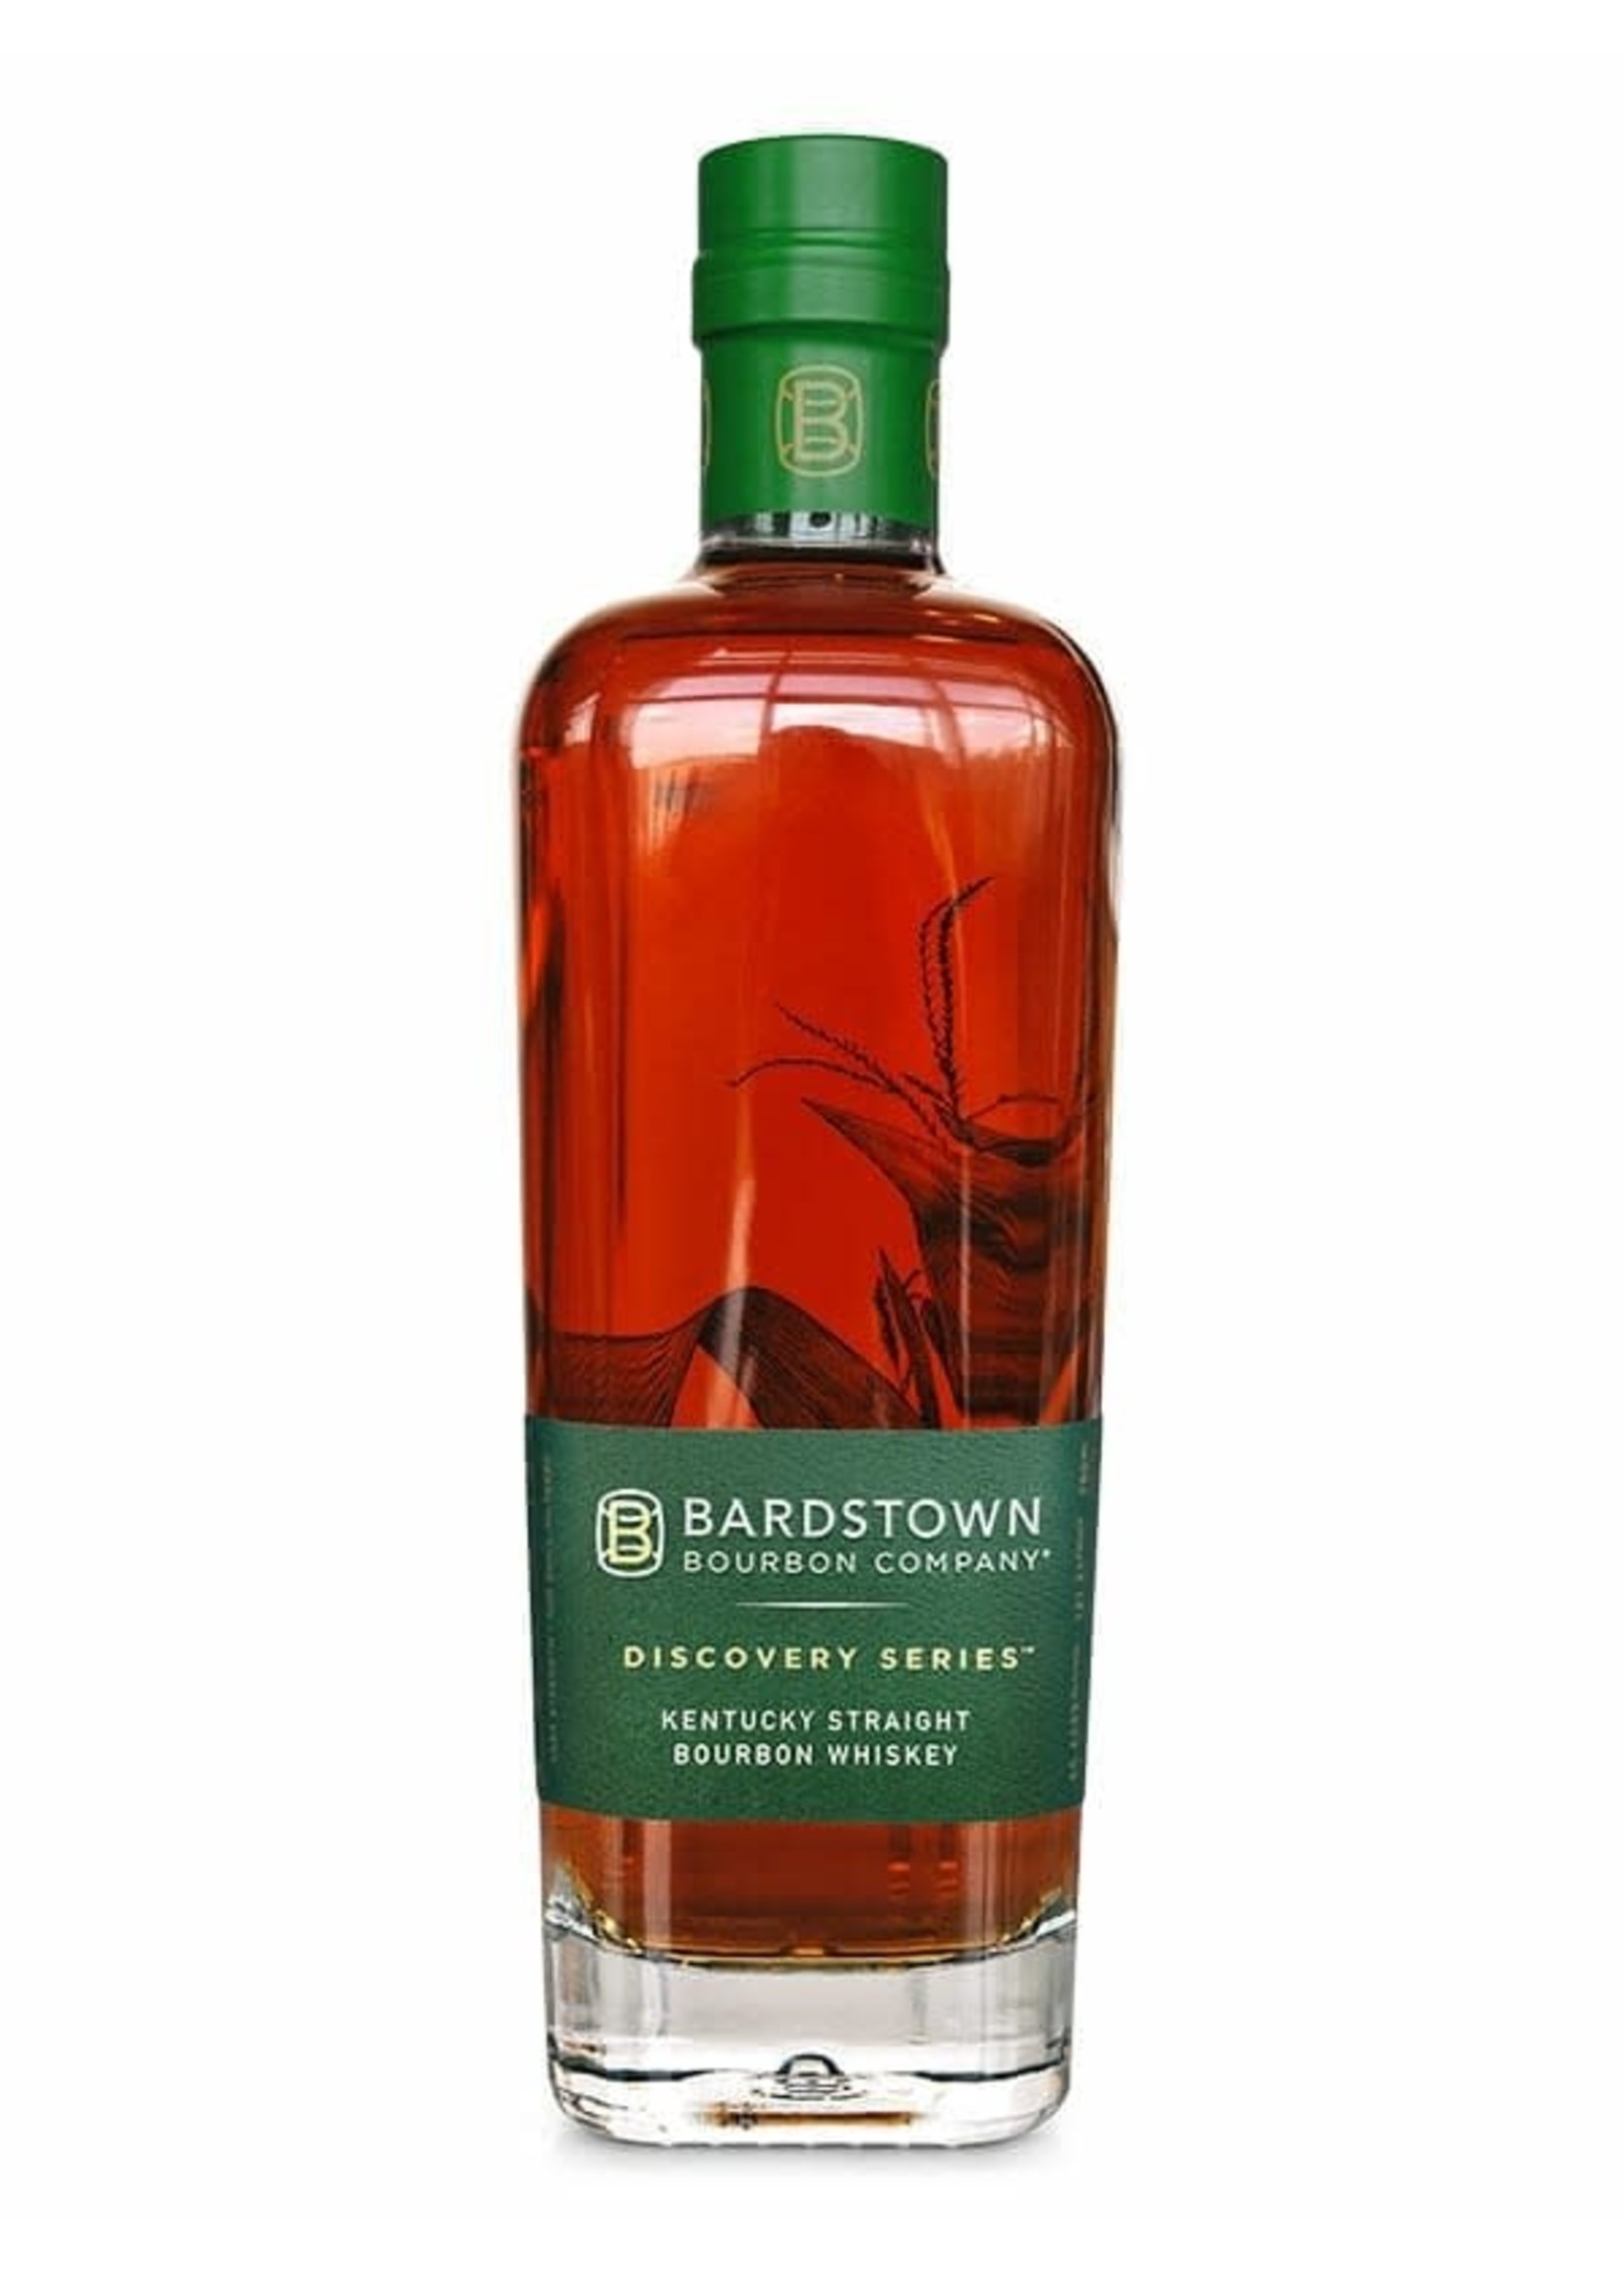 Bardstown Bourbon Company Bardstown Discovery Series #8